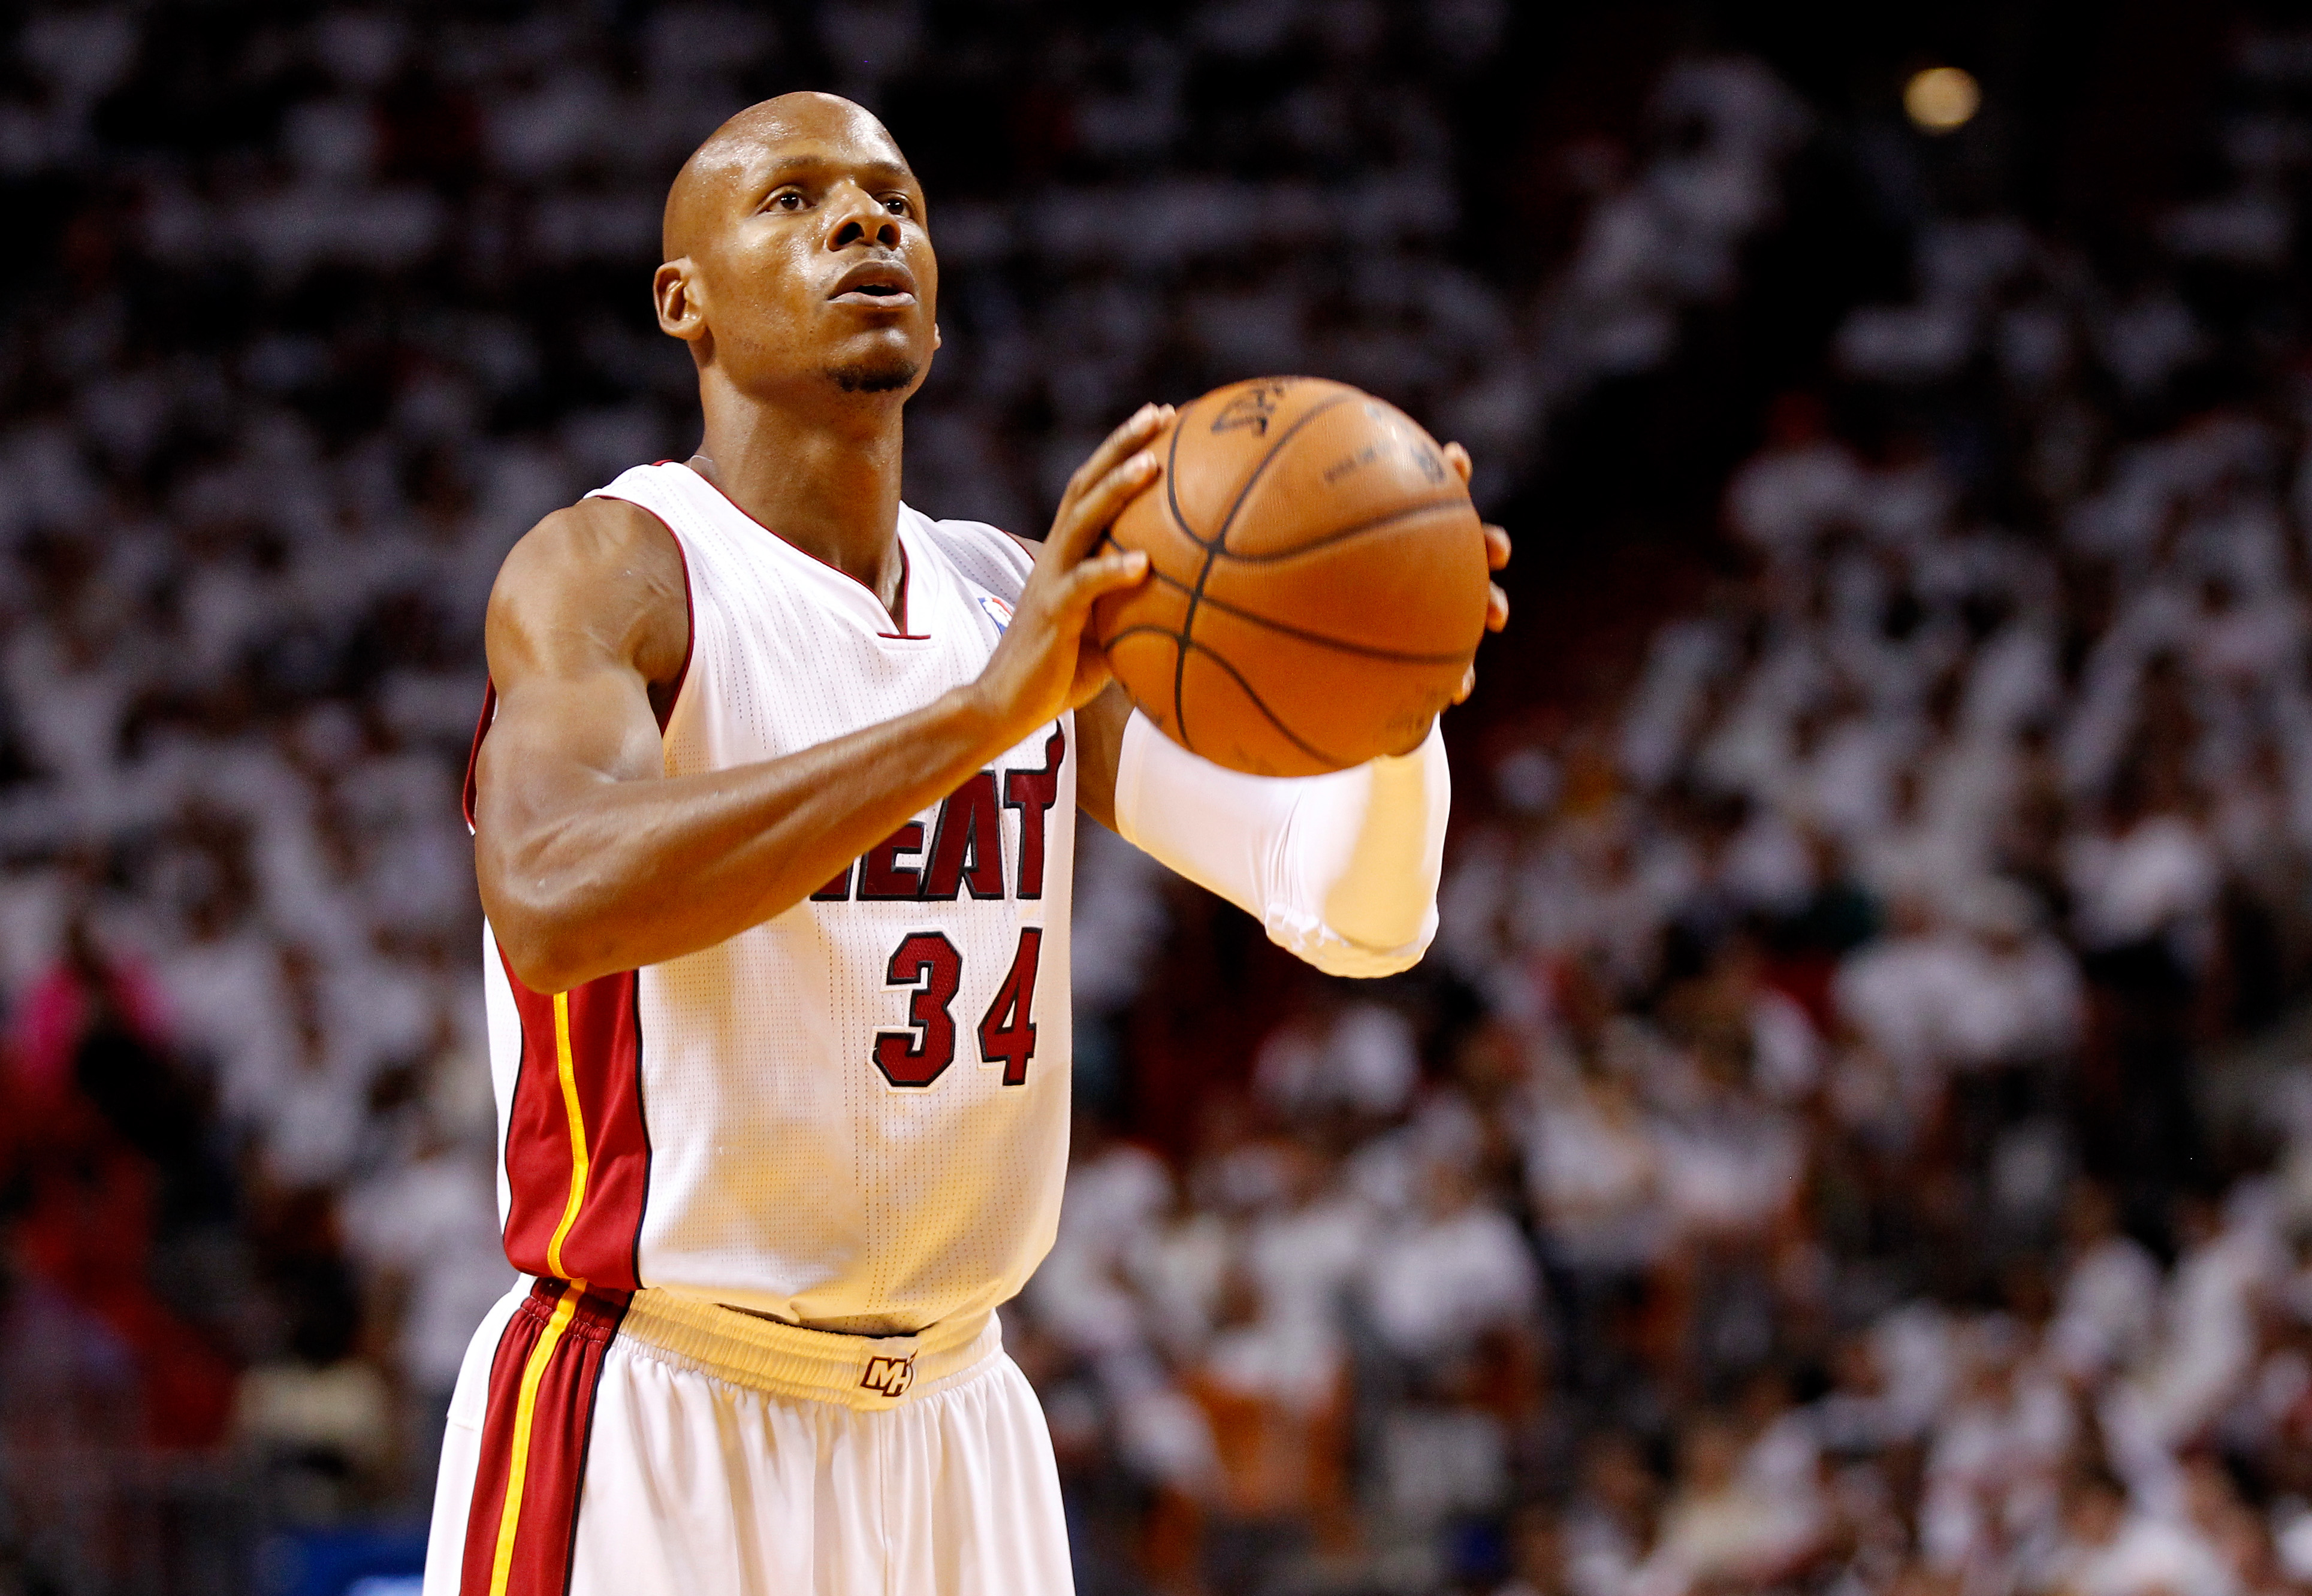 MIAMI, FL - MAY 26: Ray Allen #34 of the Miami Heat takes a foul shot against the Indiana Pacers during Game Four of the Eastern Conference Finals of the 2014 NBA Playoffs at American Airlines Arena on May 26, 2014 in Miami, Florida. NOTE TO USER: User expressly acknowledges and agrees that, by downloading and or using this photograph, User is consenting to the terms and conditions of the Getty Images License Agreement.   Mike Ehrmann/Getty Images/AFP